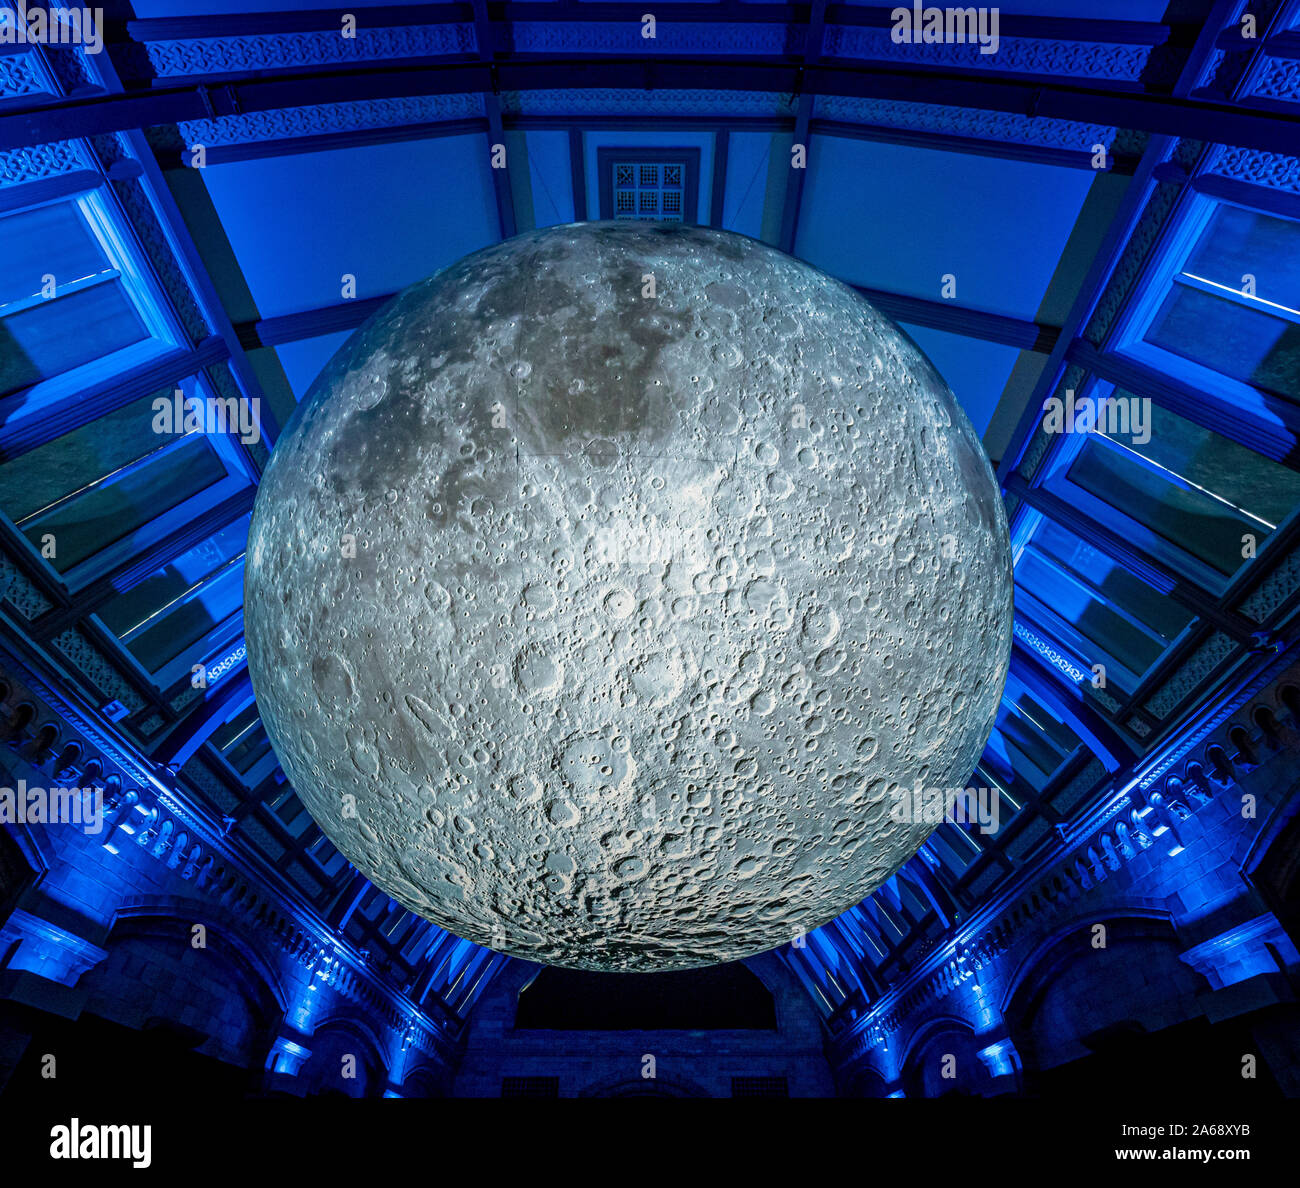 Museum of the Moon touring artwork by UK artist Luke Jerram installed at the Natural History Museum, London, UK. Stock Photo